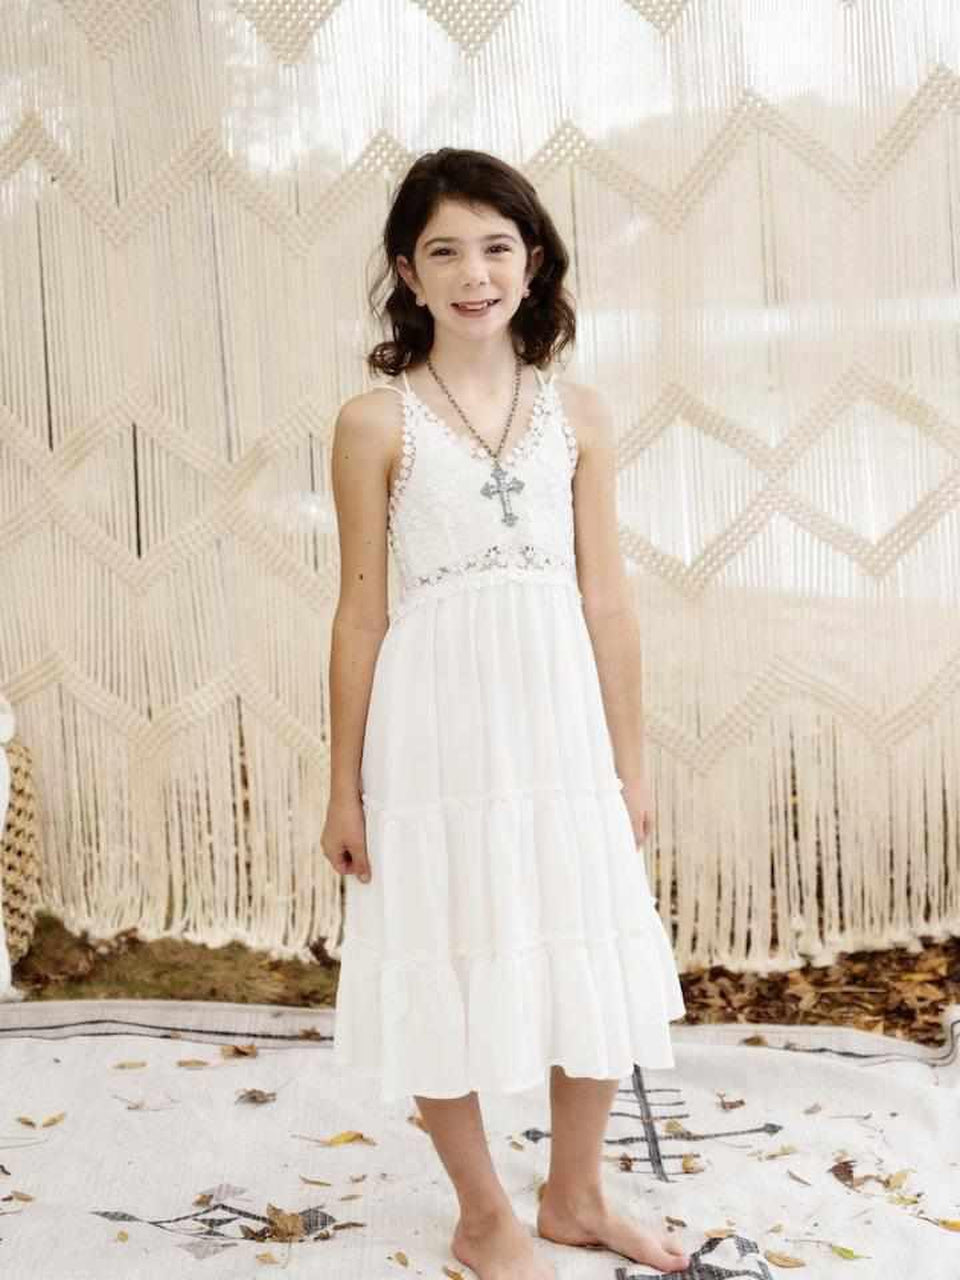 Girls Southbound Dress - White-Dresses-Southern Fried Chics